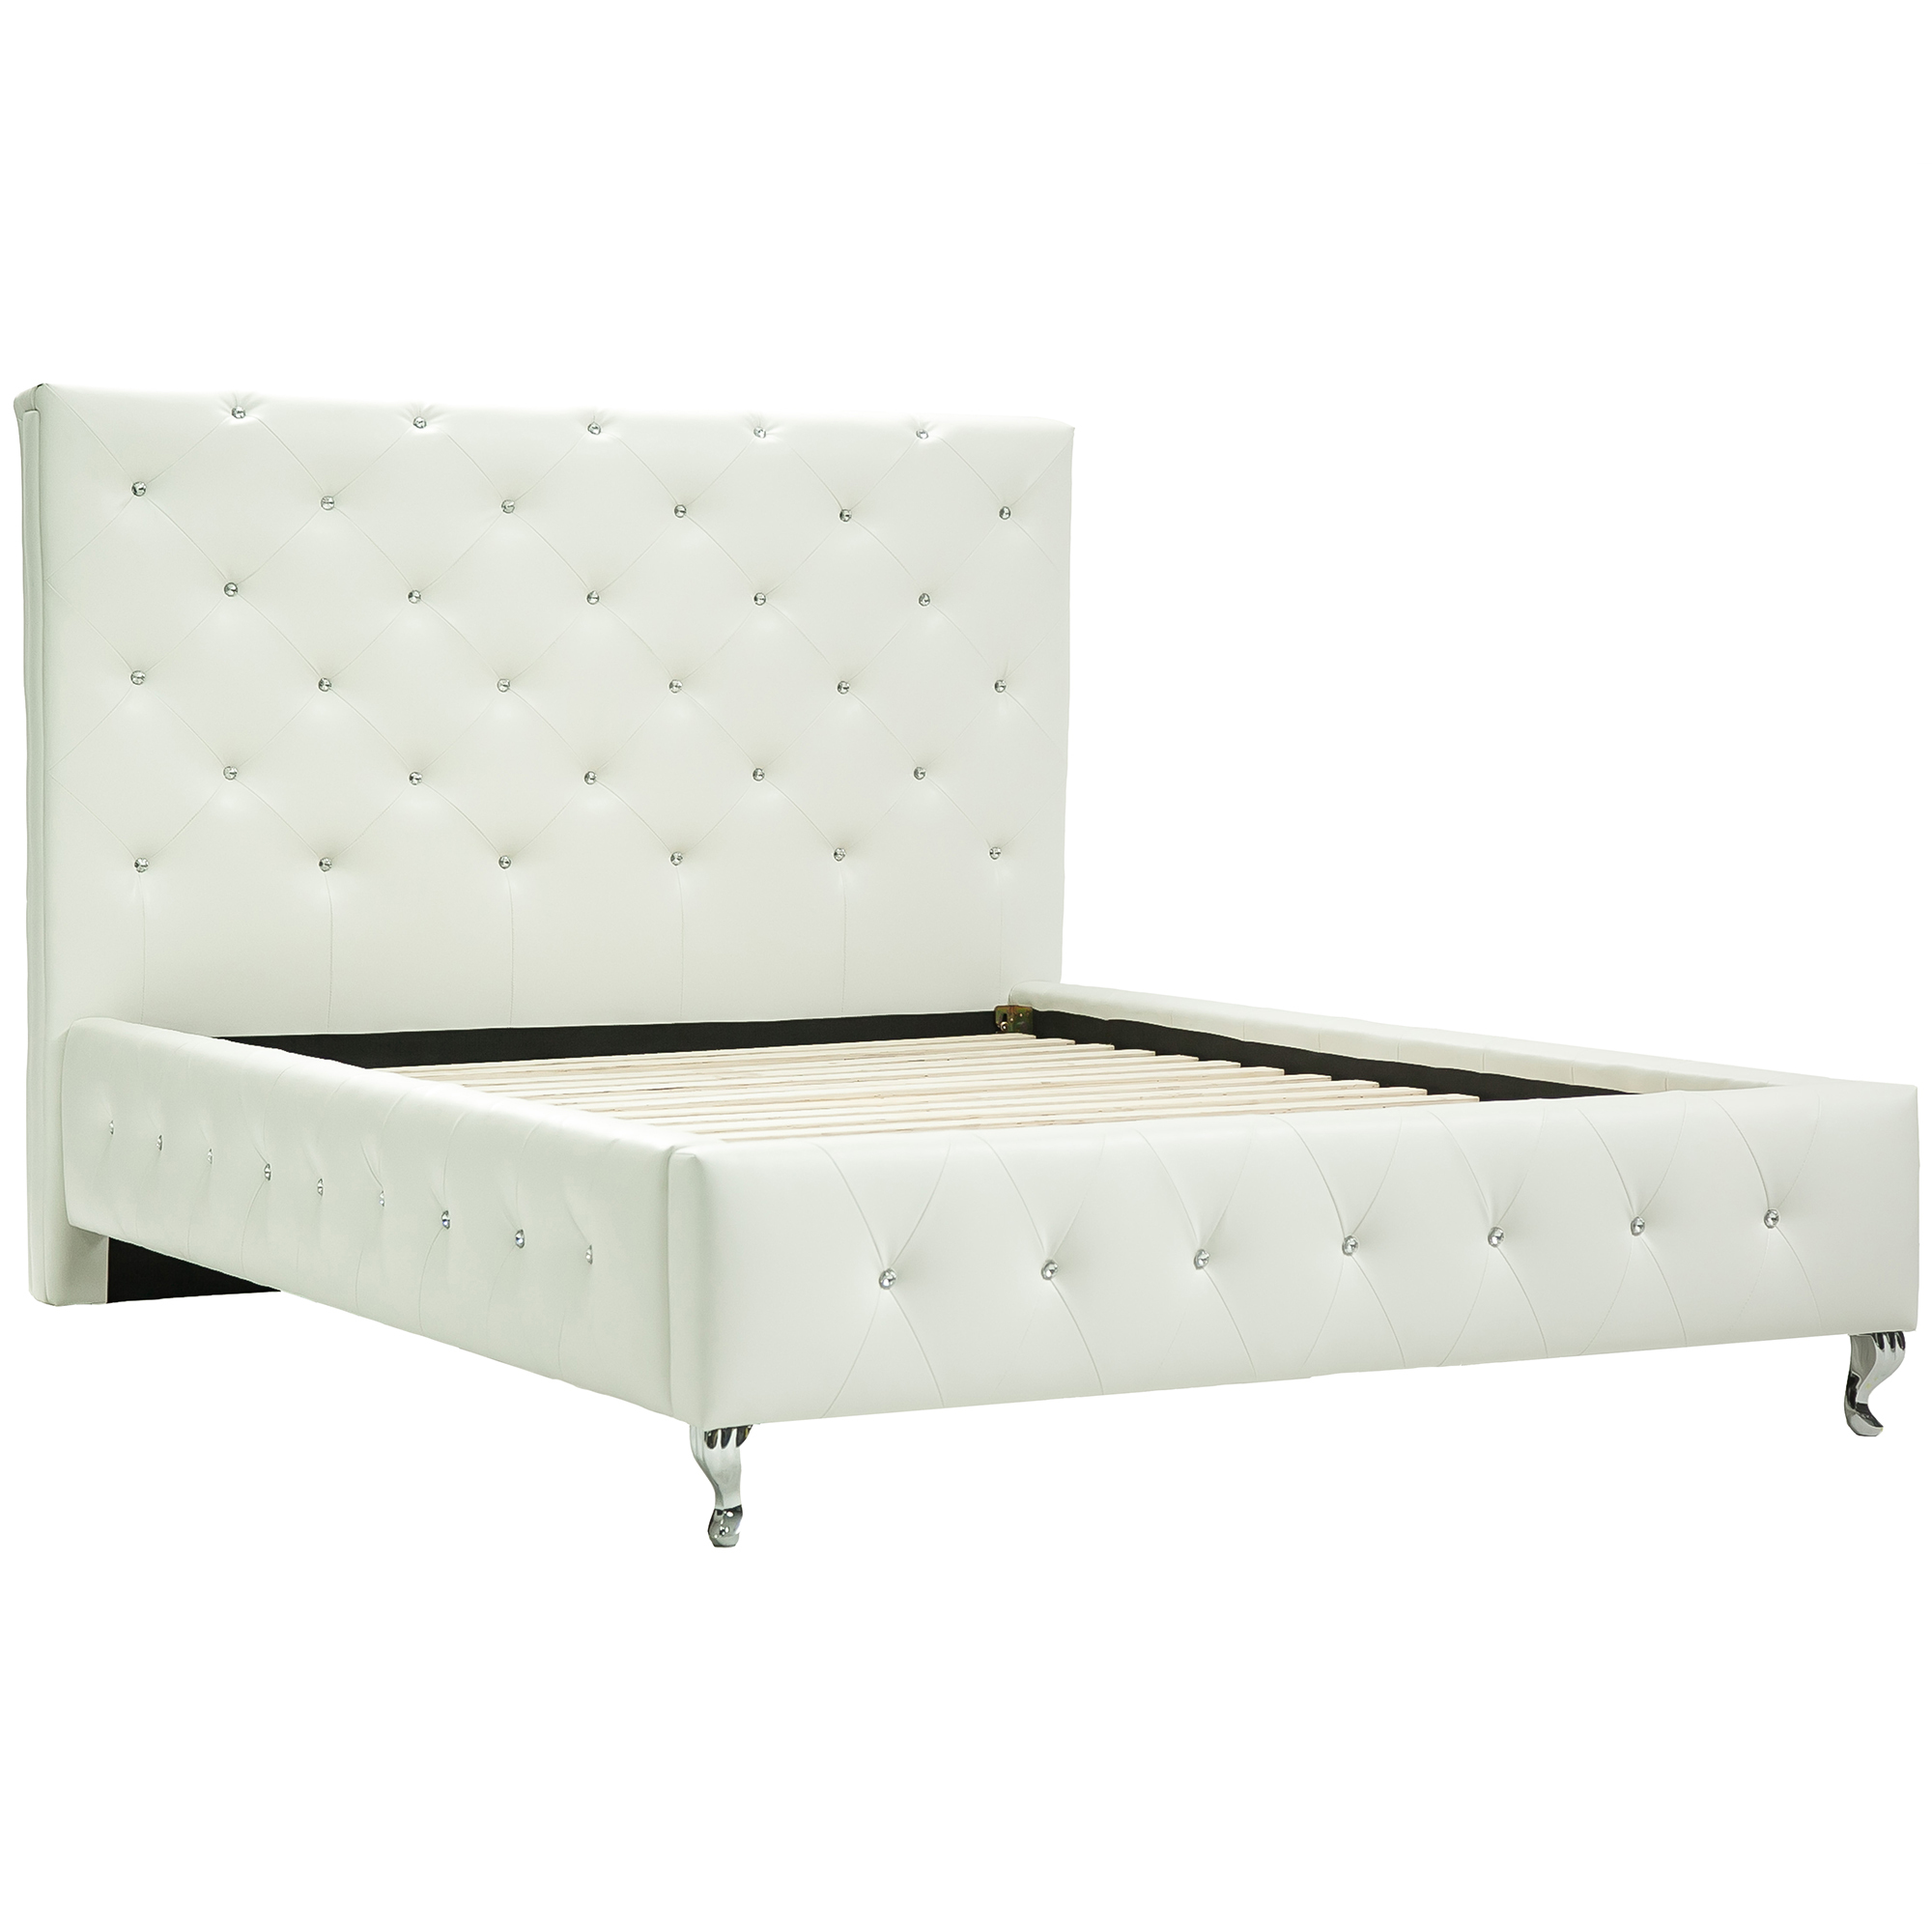 White New York King Single Bed Frame, White Faux Leather Single Bed Frame